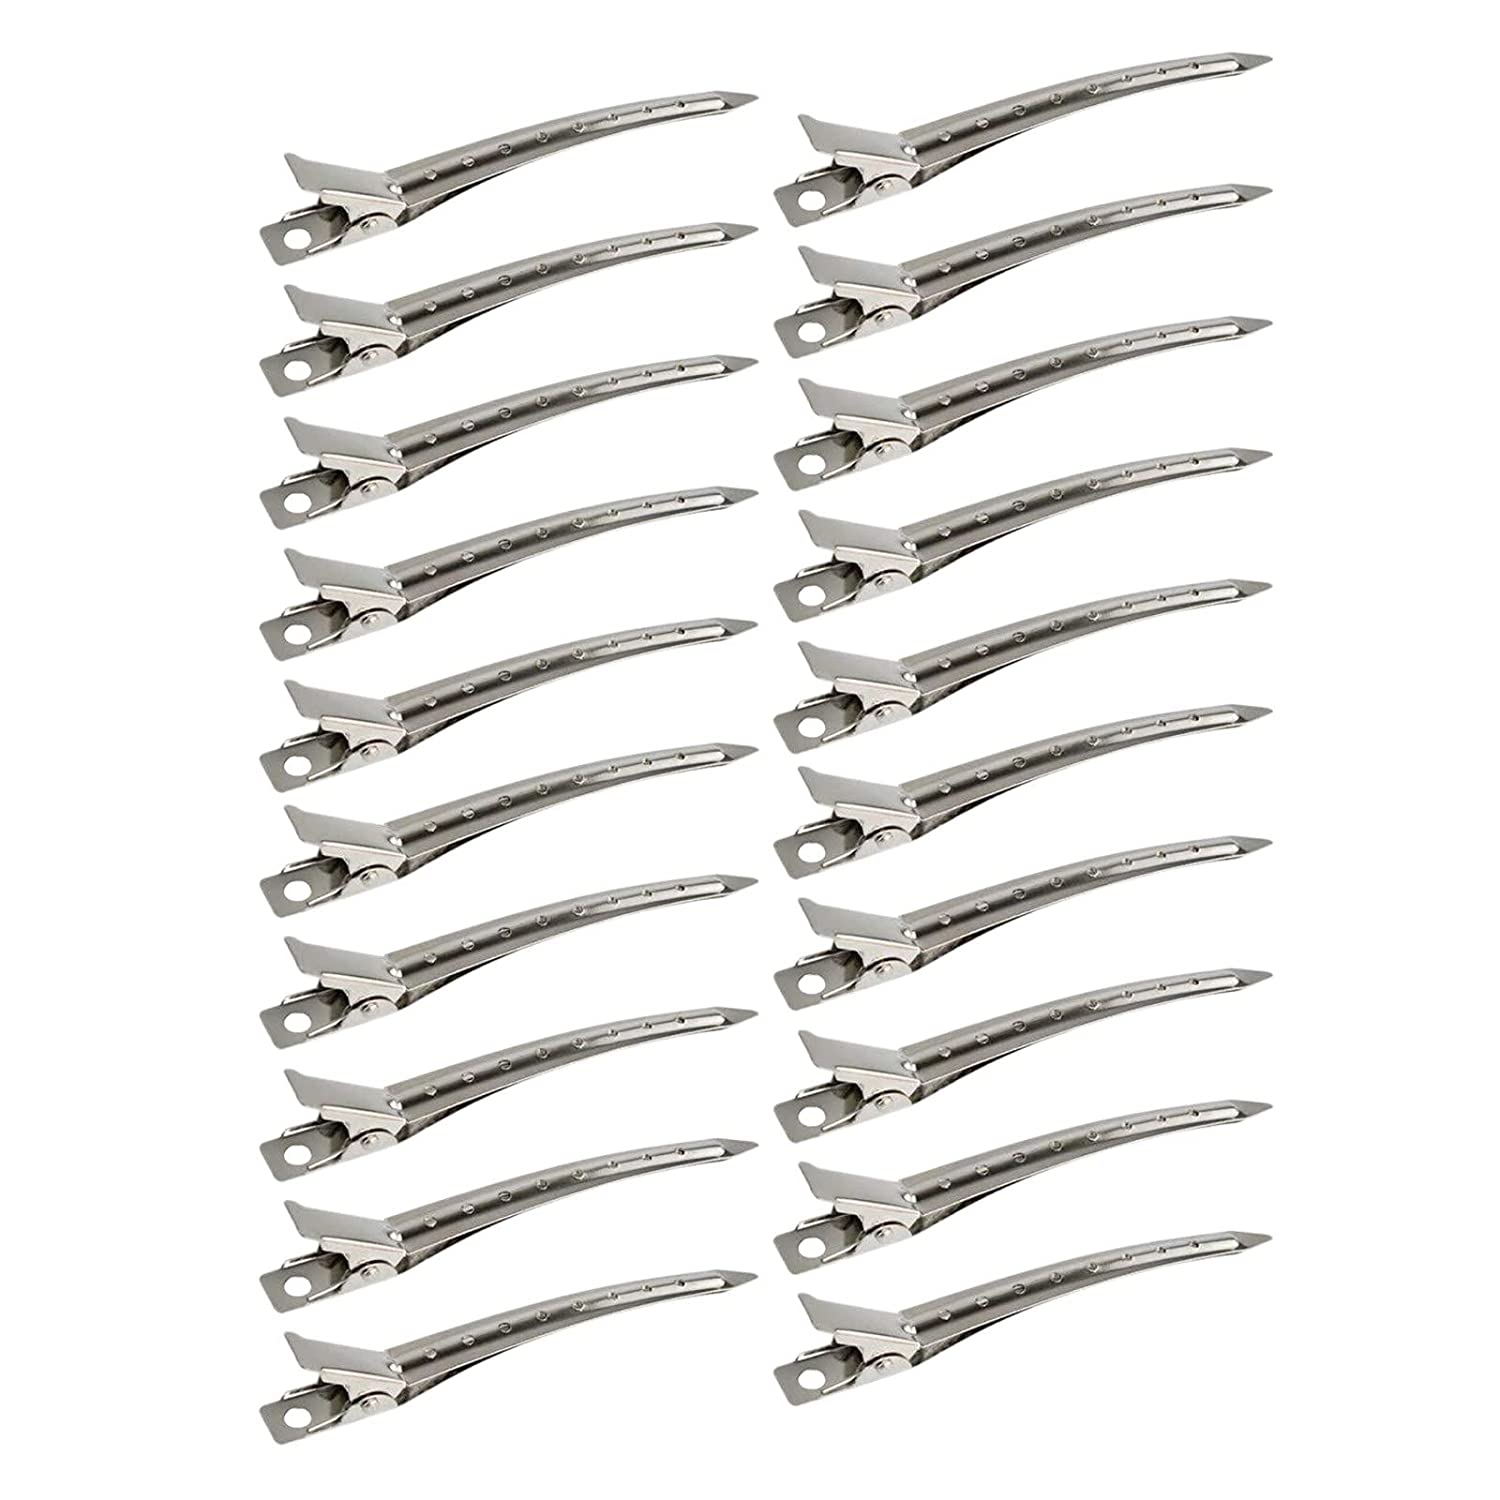 Suuchh 24 Packs Duck Bill Clips Salon Use Metal Hair Clips for Men Women Barbershop Use Hair Clips Hair Hair Clip Holder (Silver, One Size), Men's